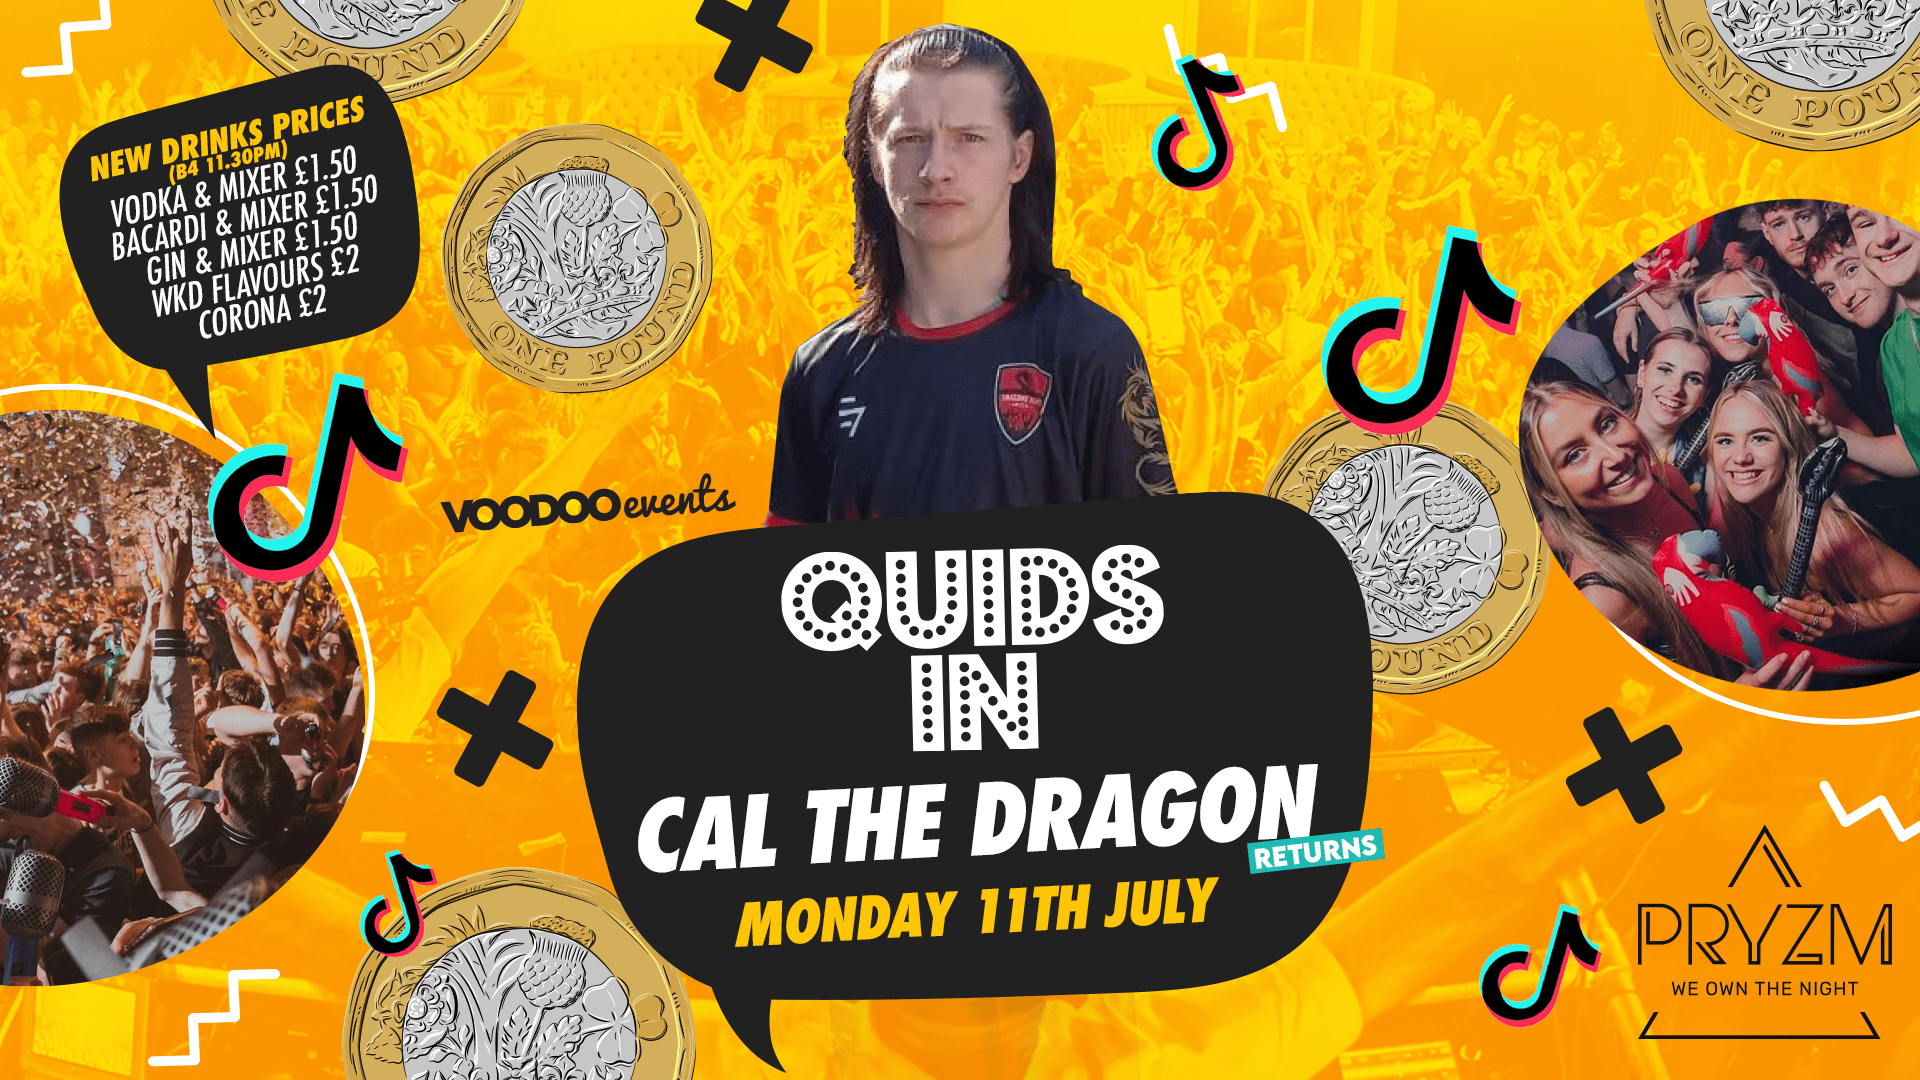 Quids In Mondays CAL THE DRAGON RETURNS – 11th July